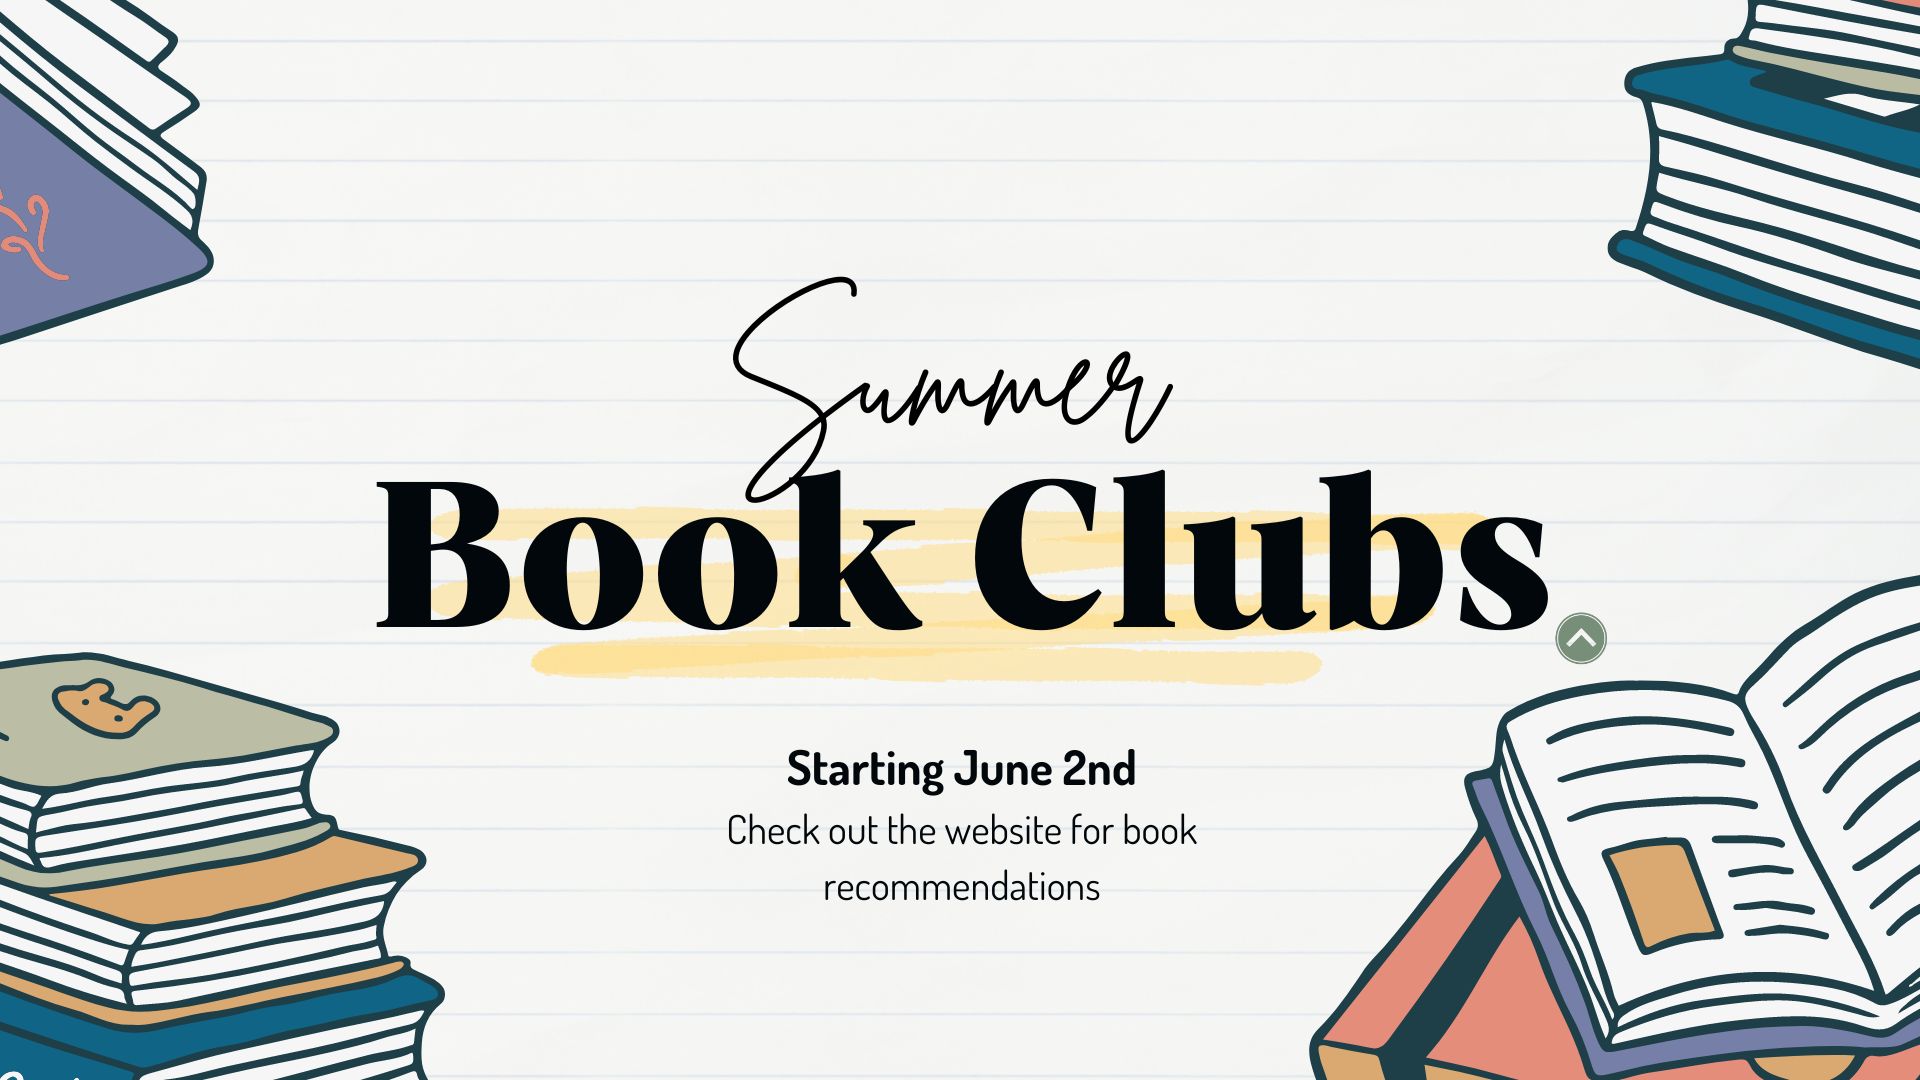 Summer Book Clubs image